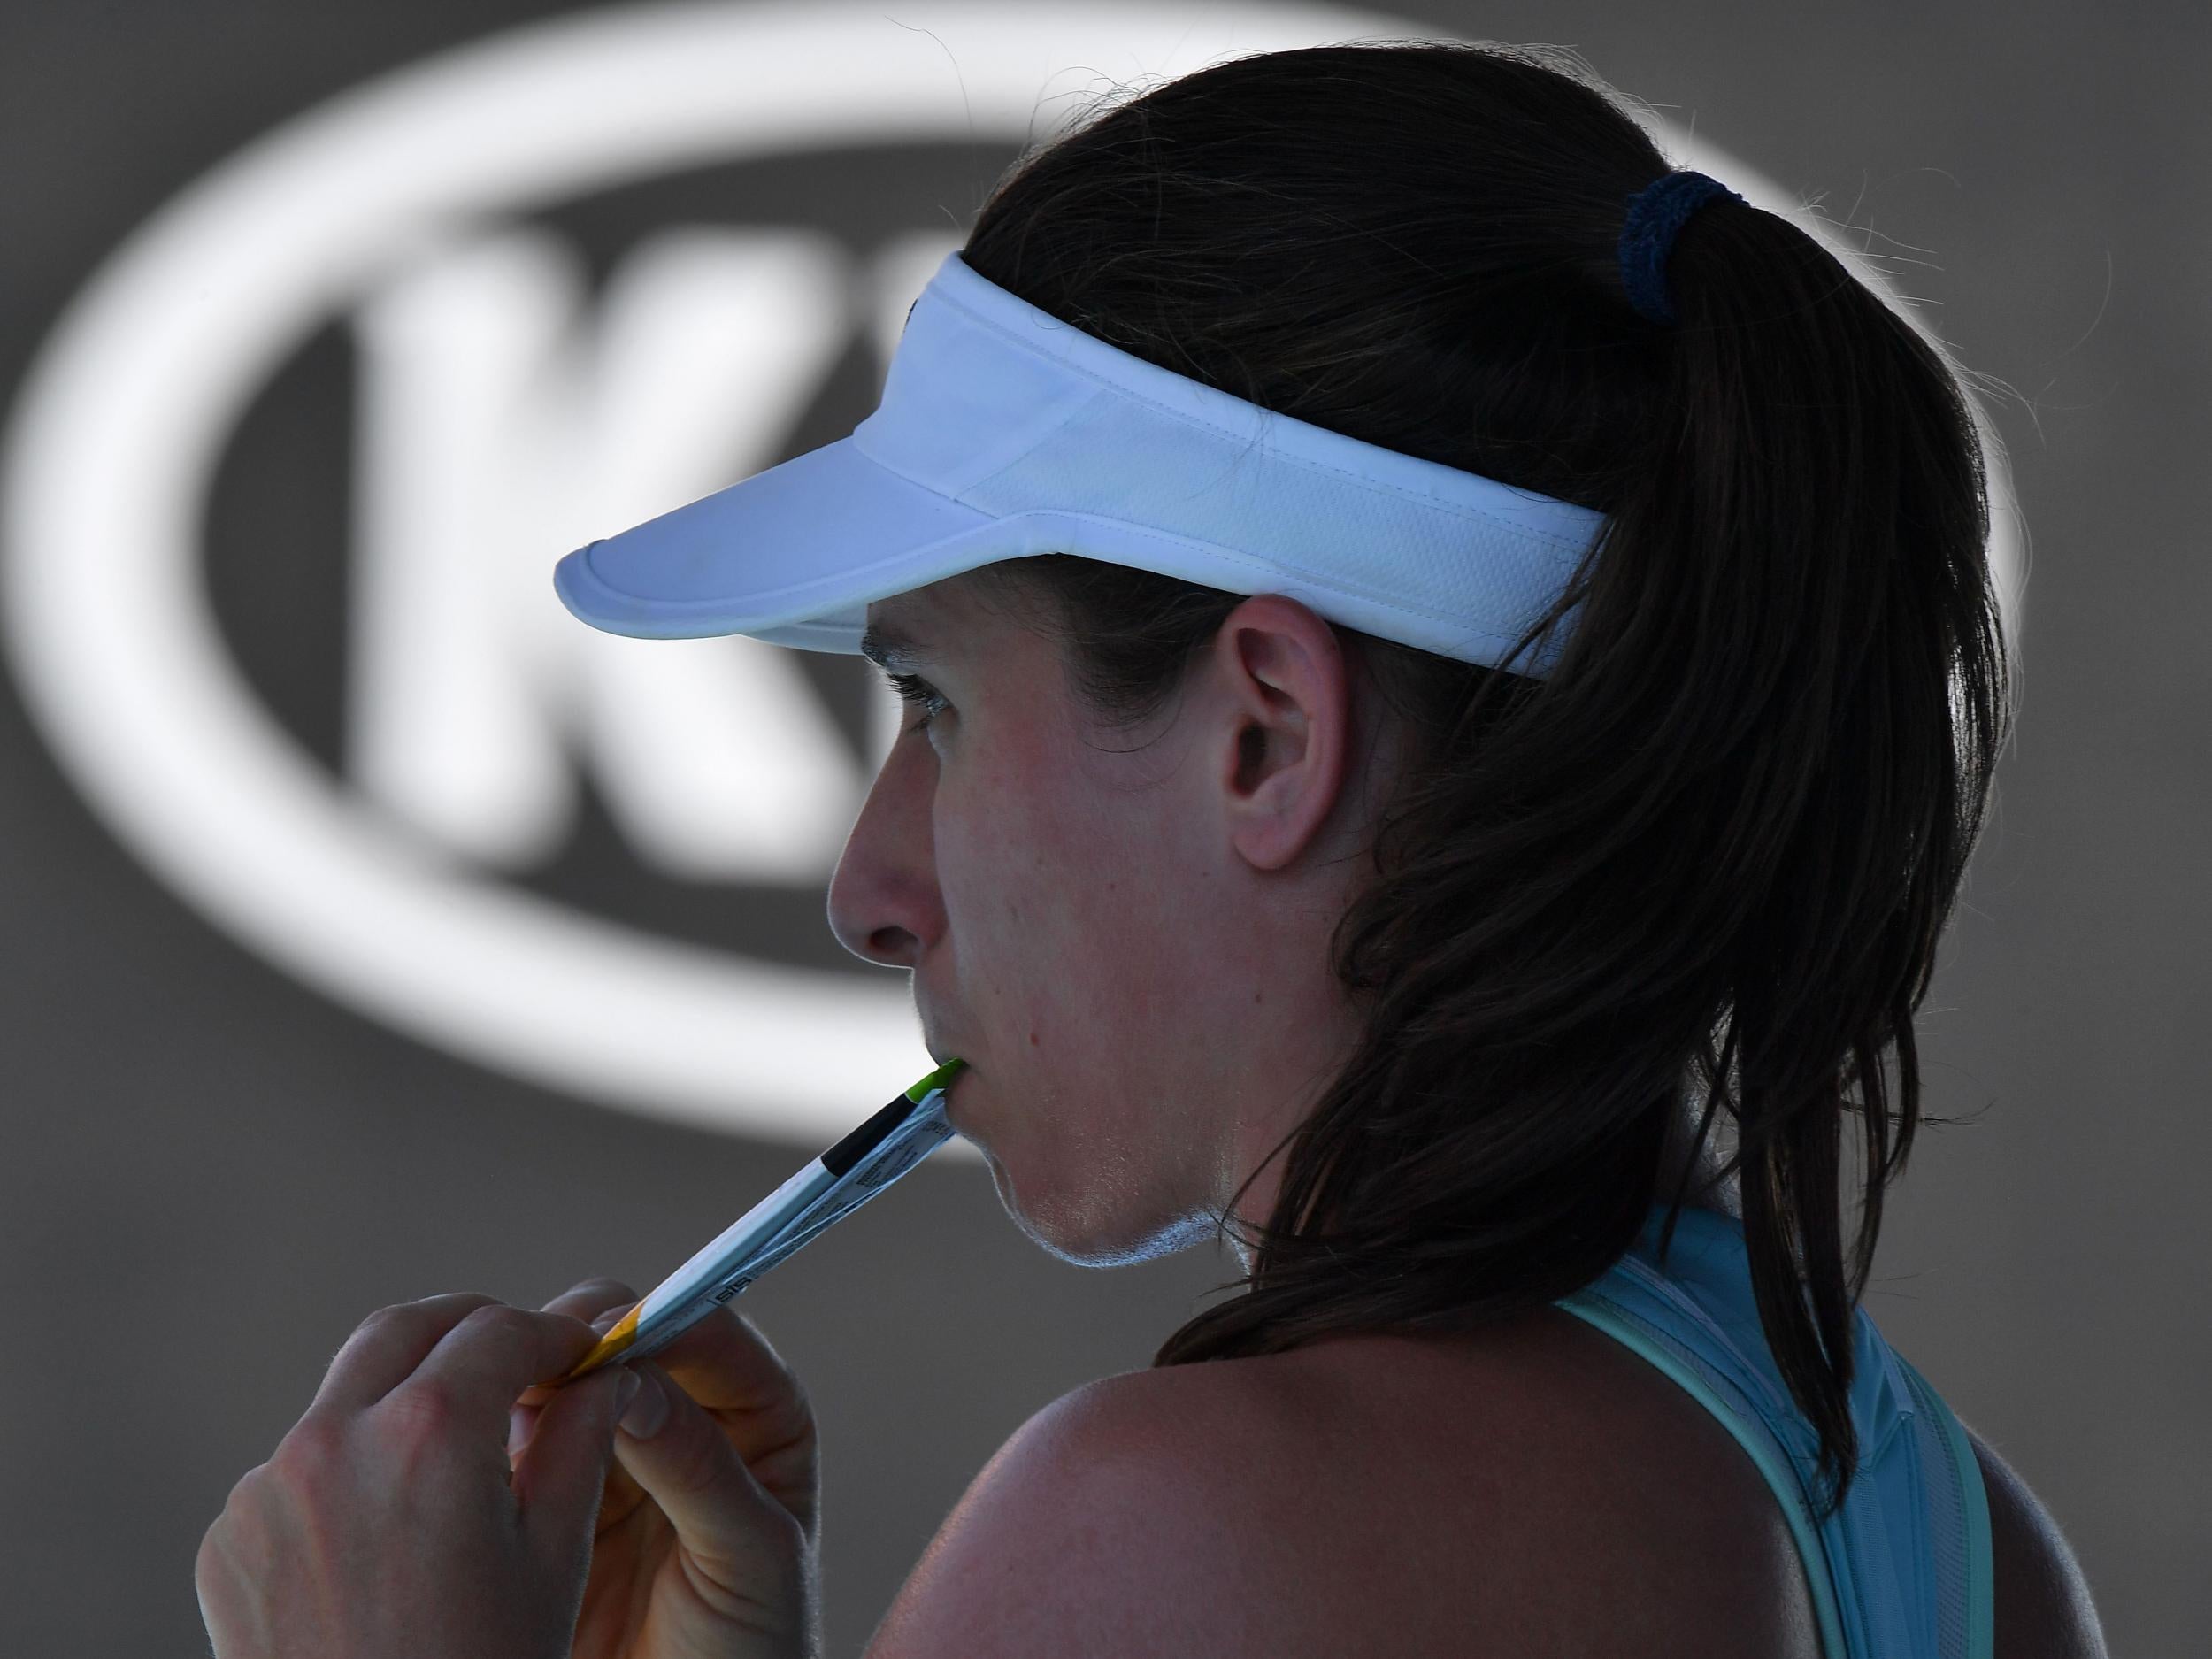 &#13;
Johanna Konta crashed out in the second round &#13;